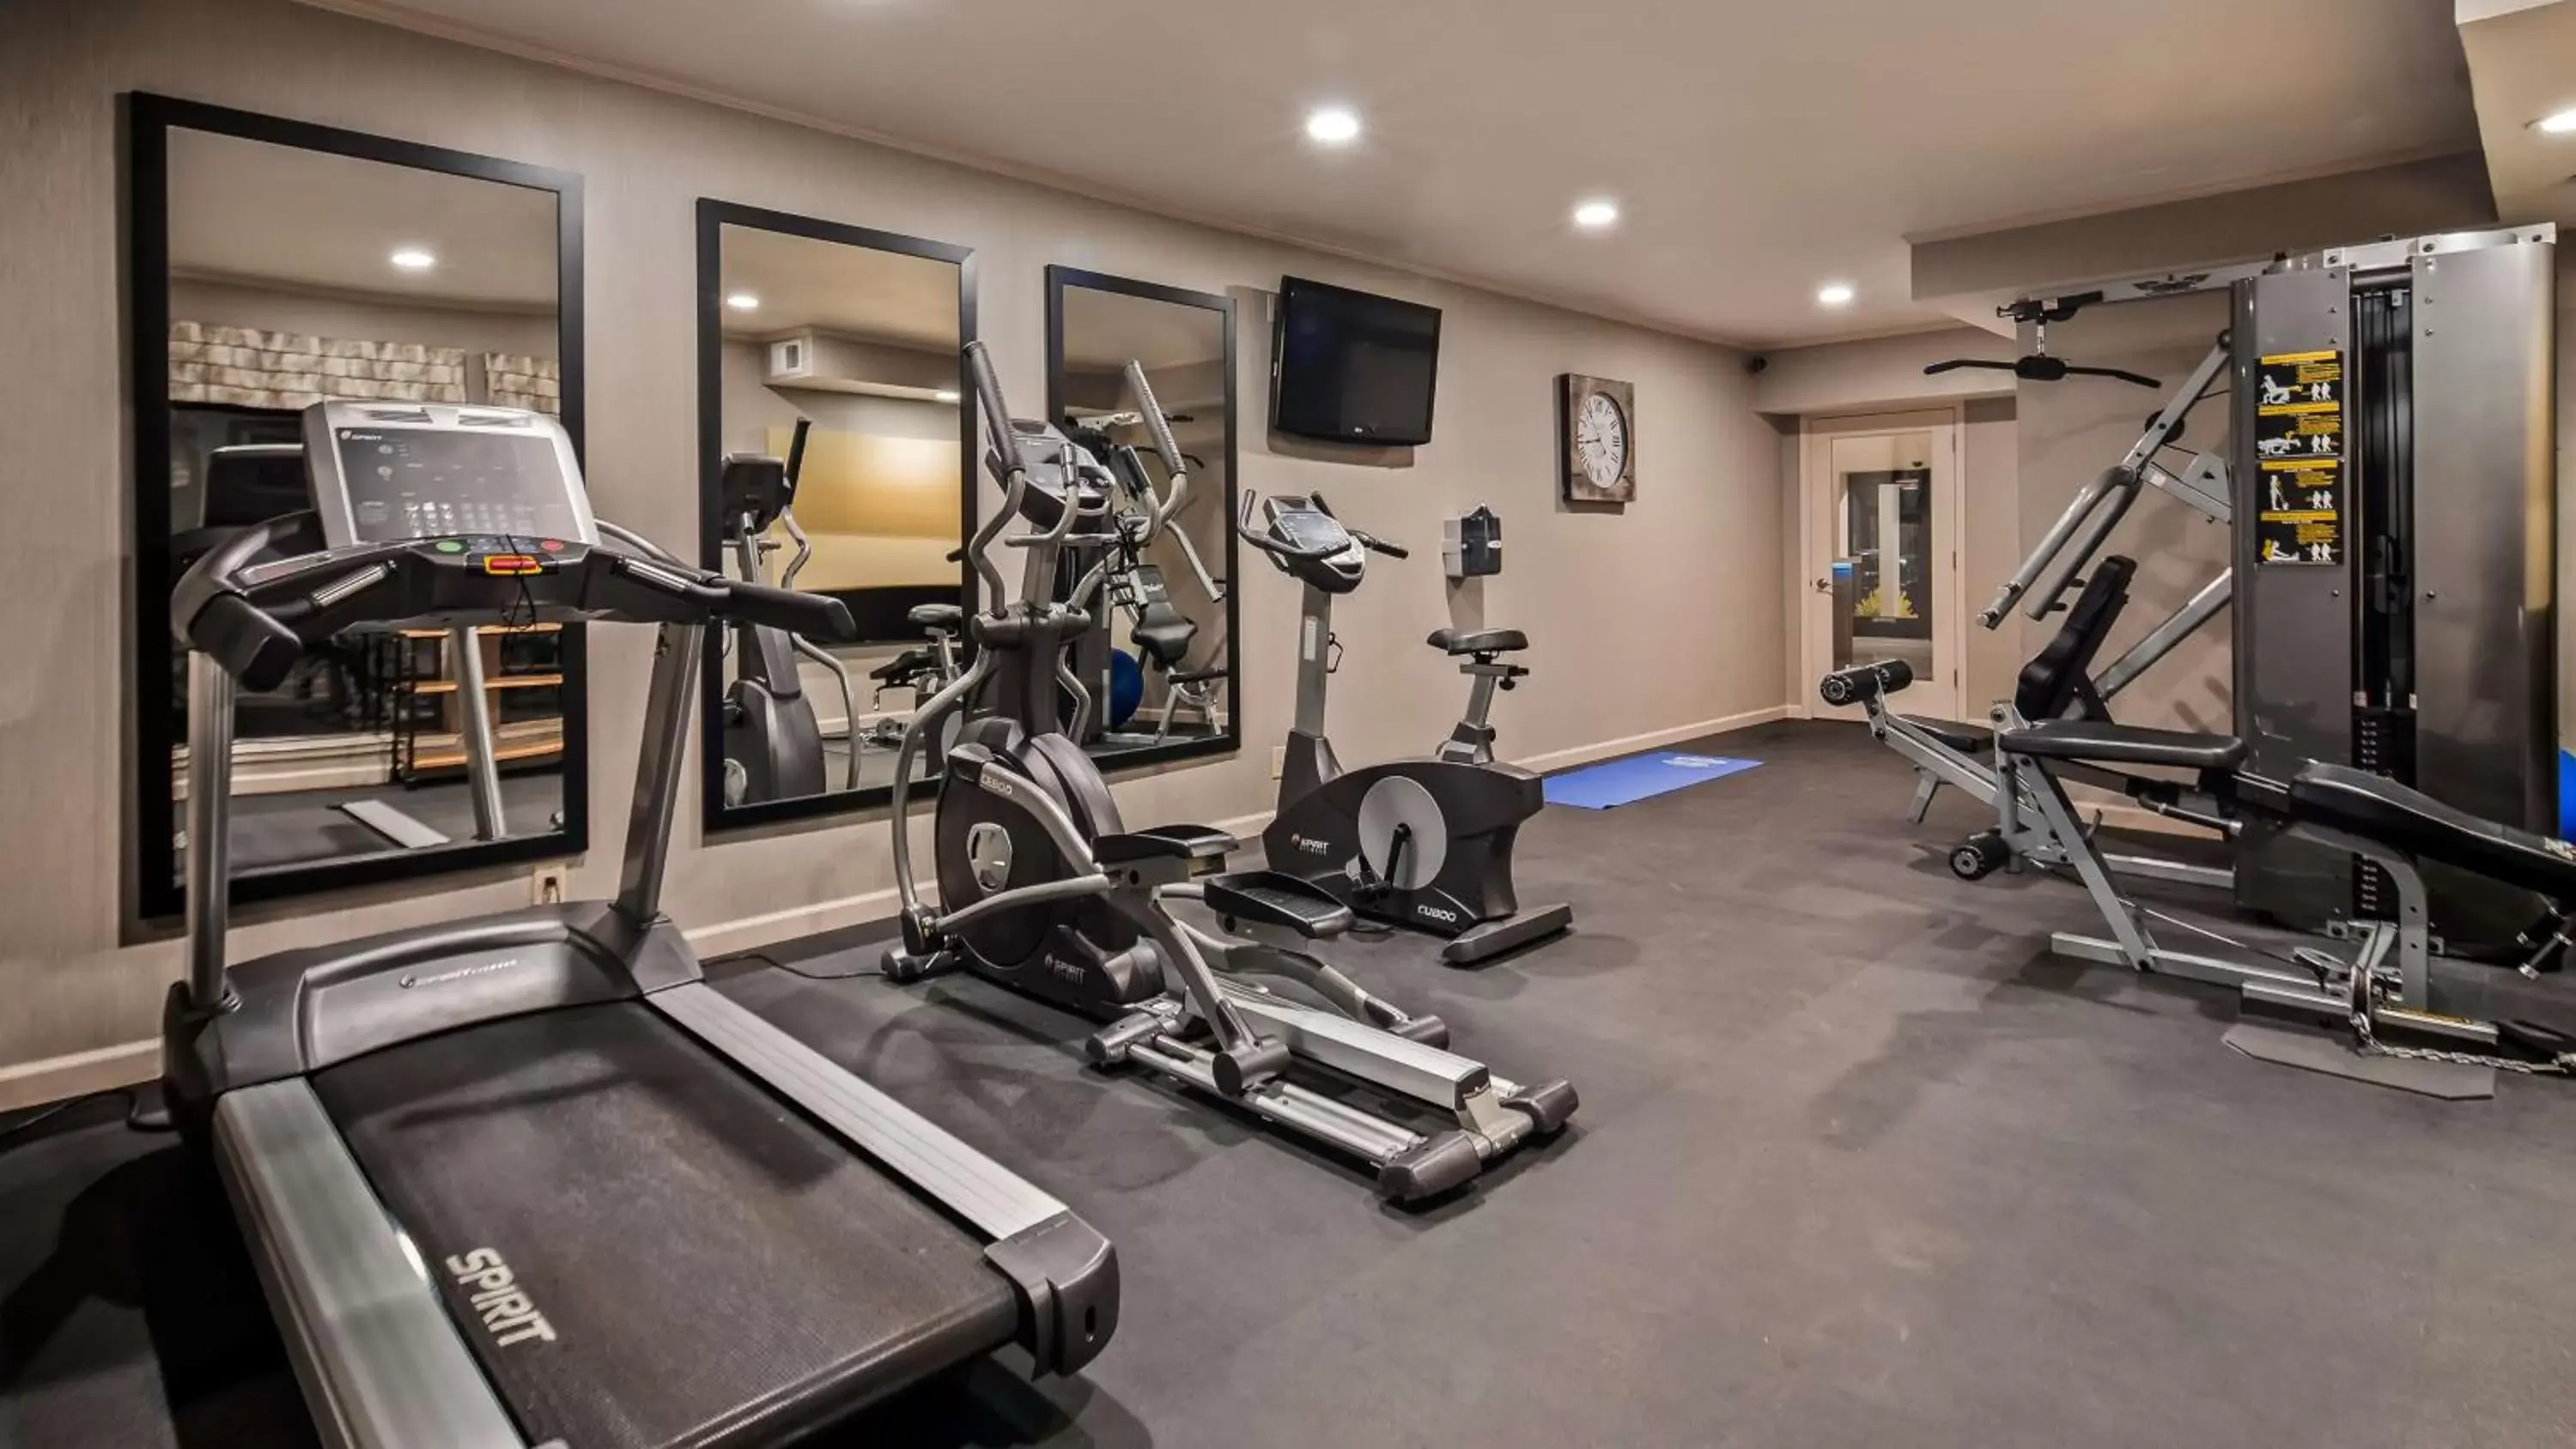 Fitness centre/facilities, Fitness Center/Facilities in Best Western Plus Inn Scotts Valley